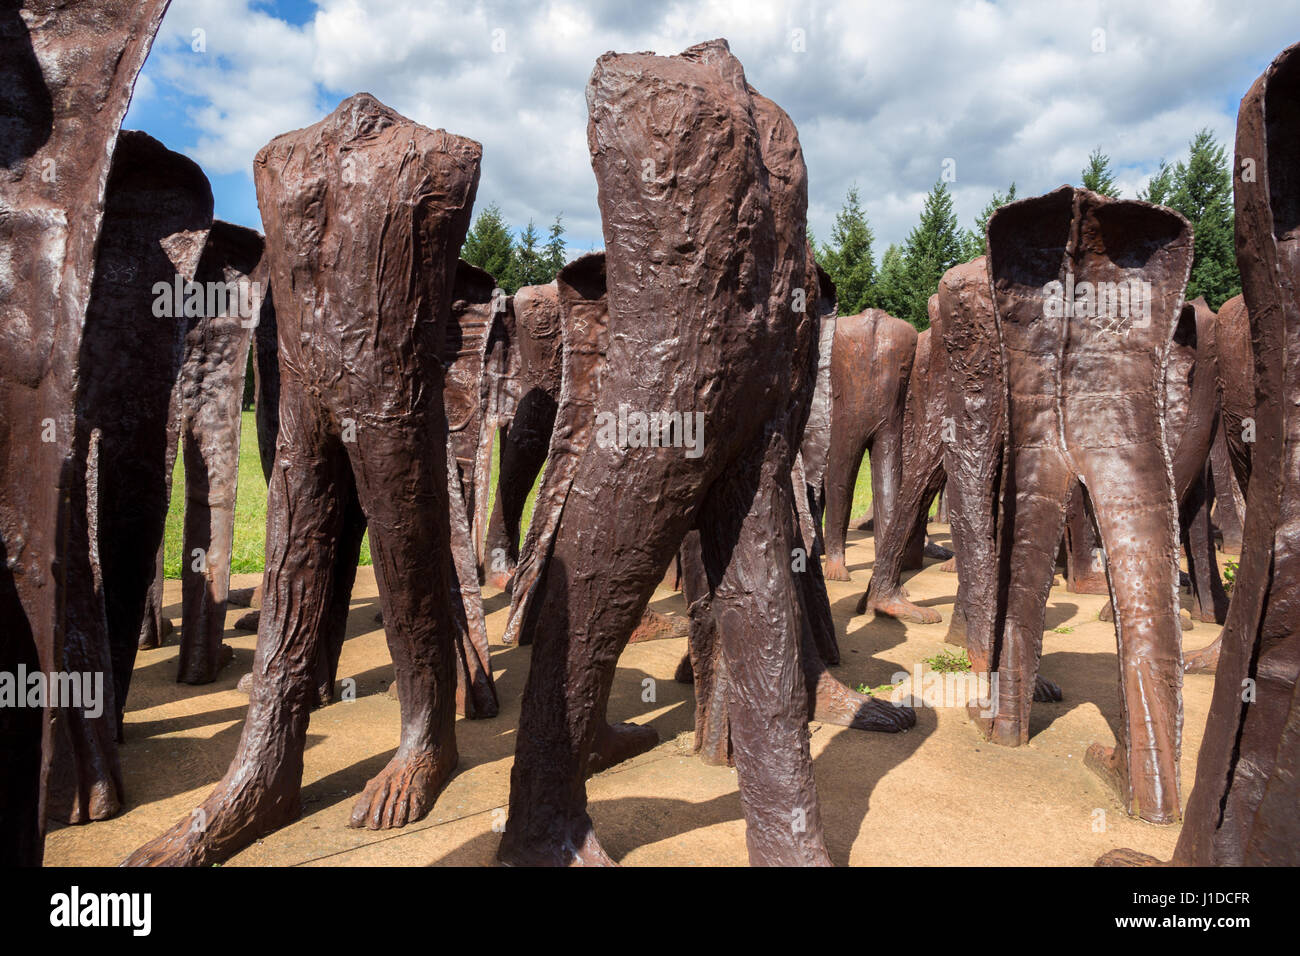 POZNAN, POLAND - AUG 20, 2014: Iron 2 meter tall headless figures marching aimlessly across the Citadel Park in Poznan. The monument is called Unrecog Stock Photo